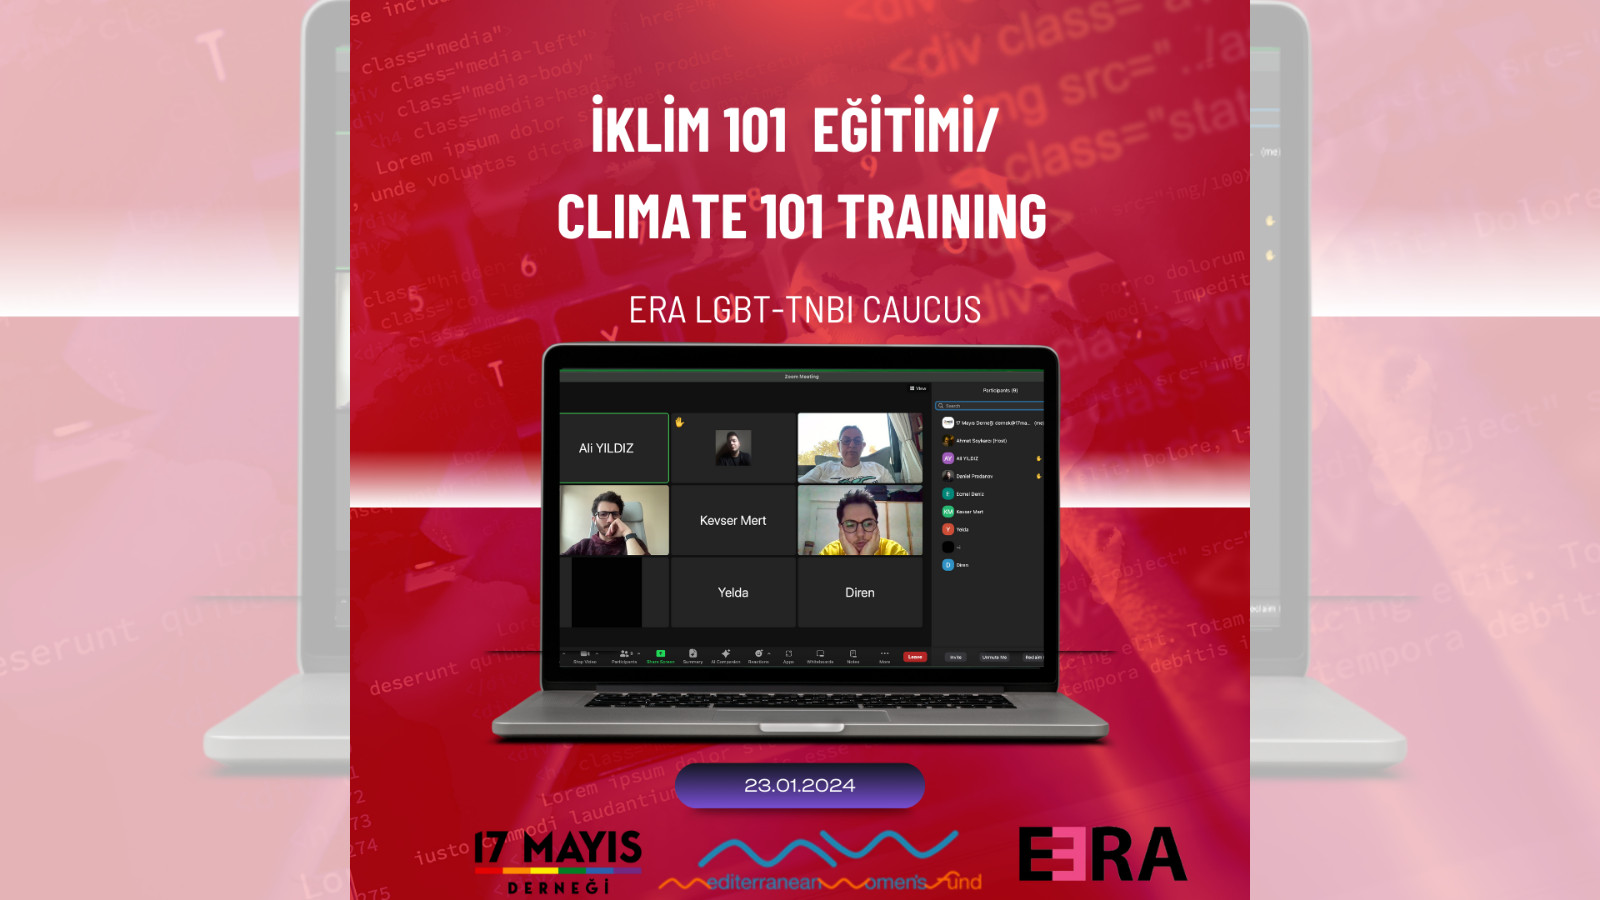 The May 17 Association provided Climate 101 training to ERA LGBTI - May 17 Association